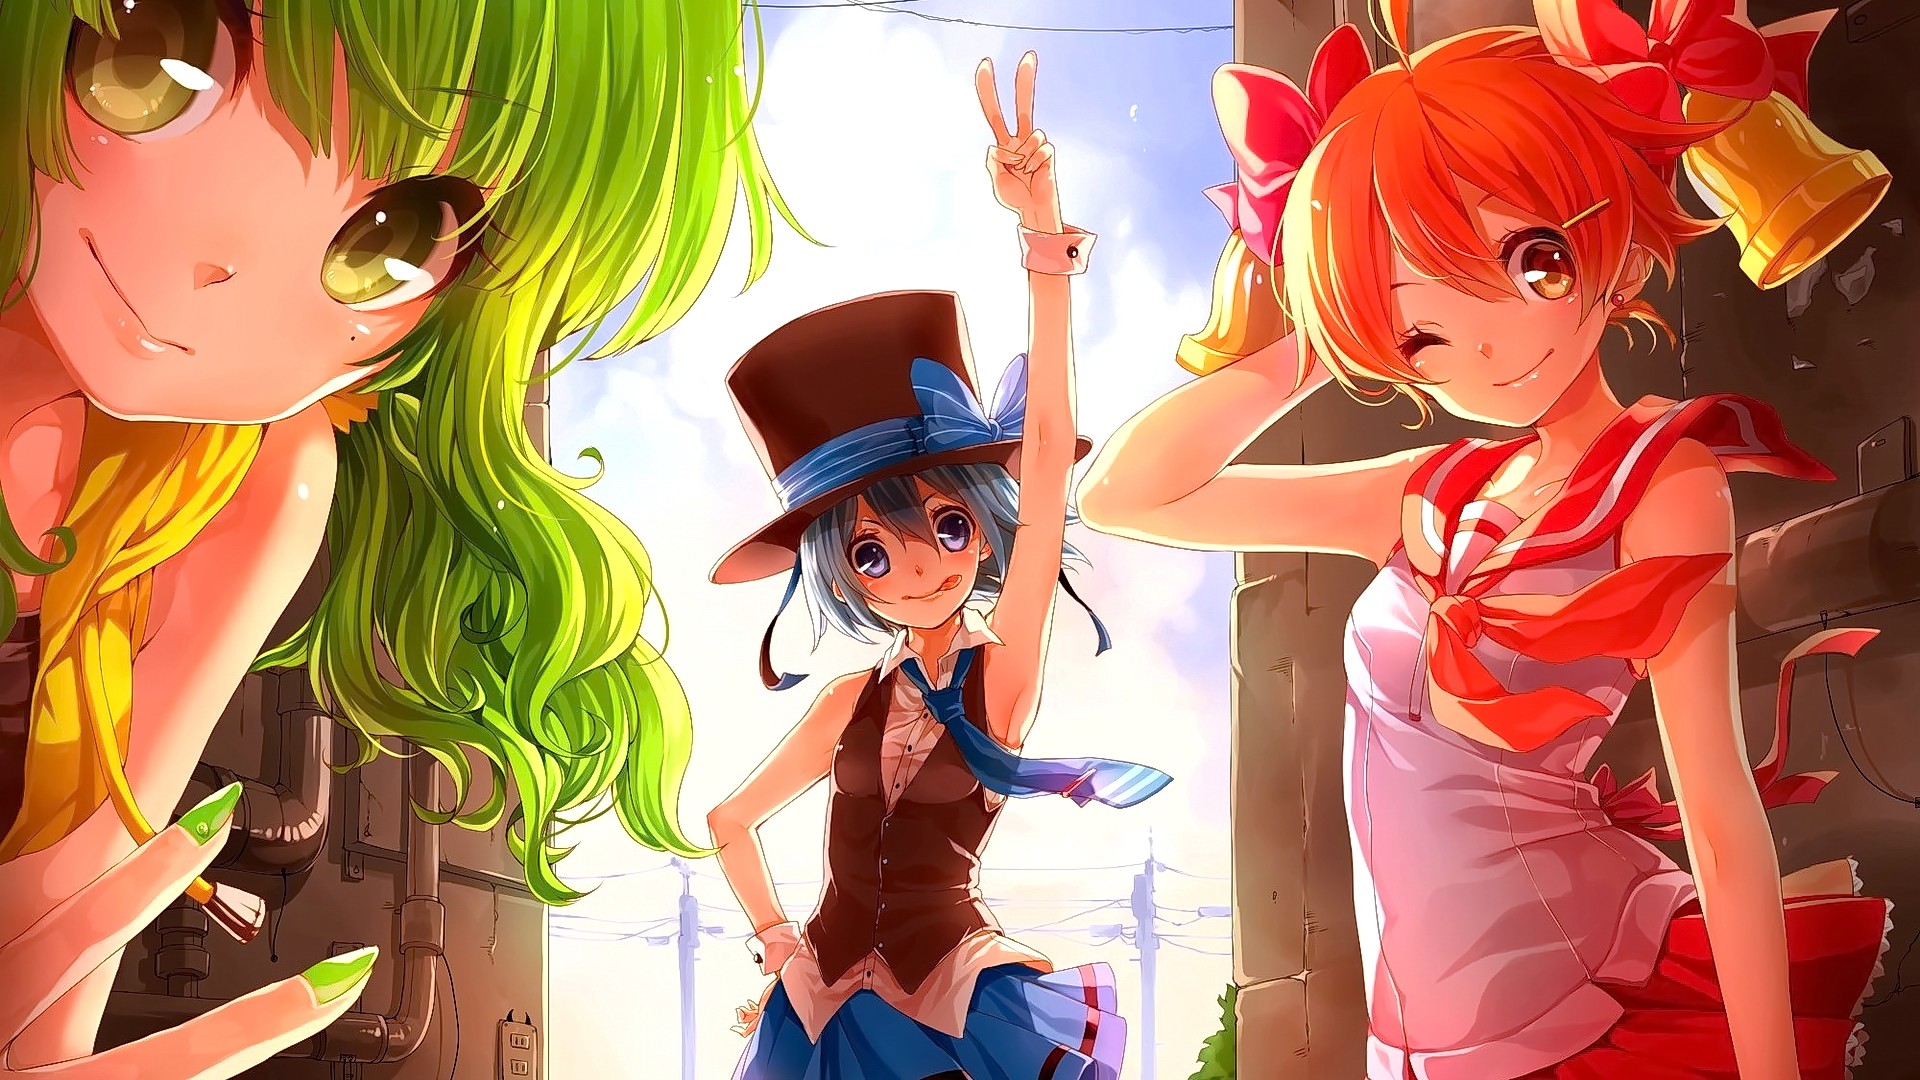 Anime 1920x1080 anime anime girls gray hair redhead green hair long hair green eyes gray eyes hat looking at viewer wink smiling Utau women trio hand gesture one eye closed tie women with hats bell tongues tongue out